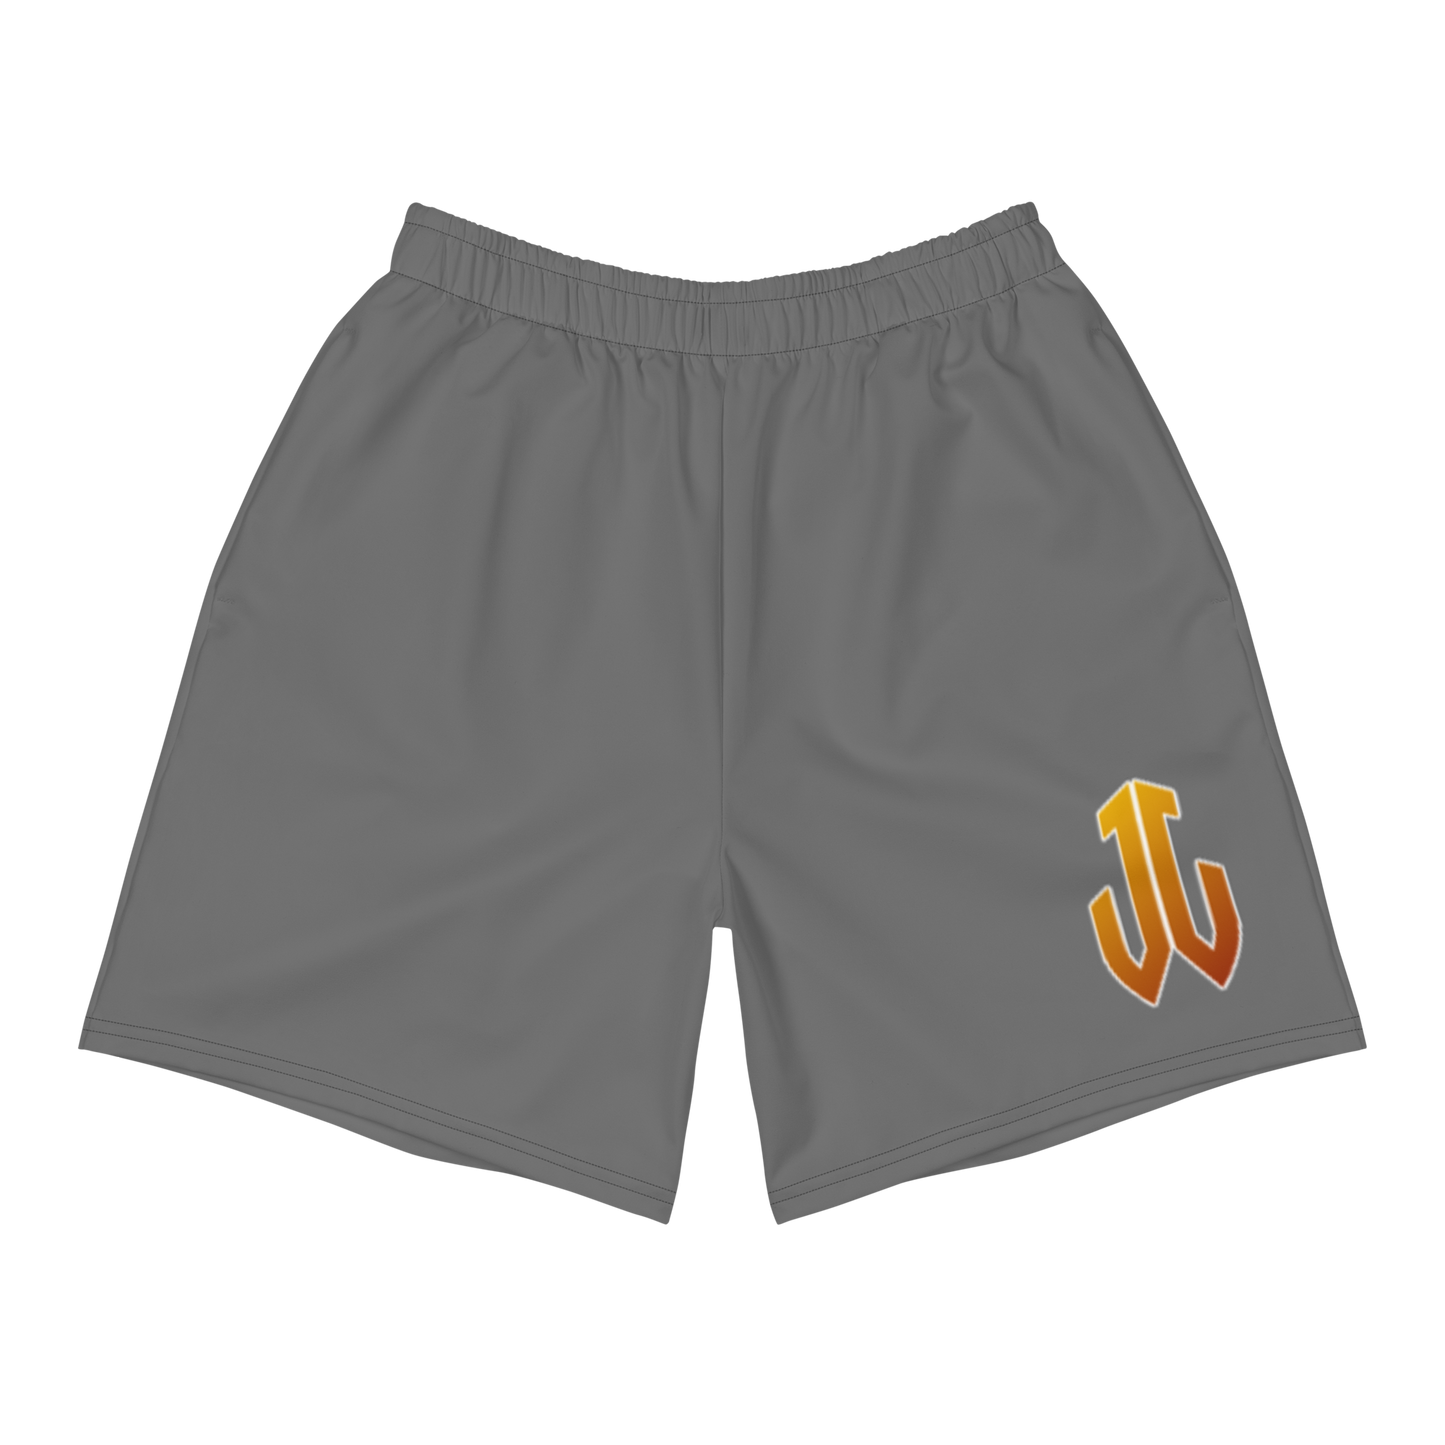 JAVEN JACOBS ATHLETIC SHORTS